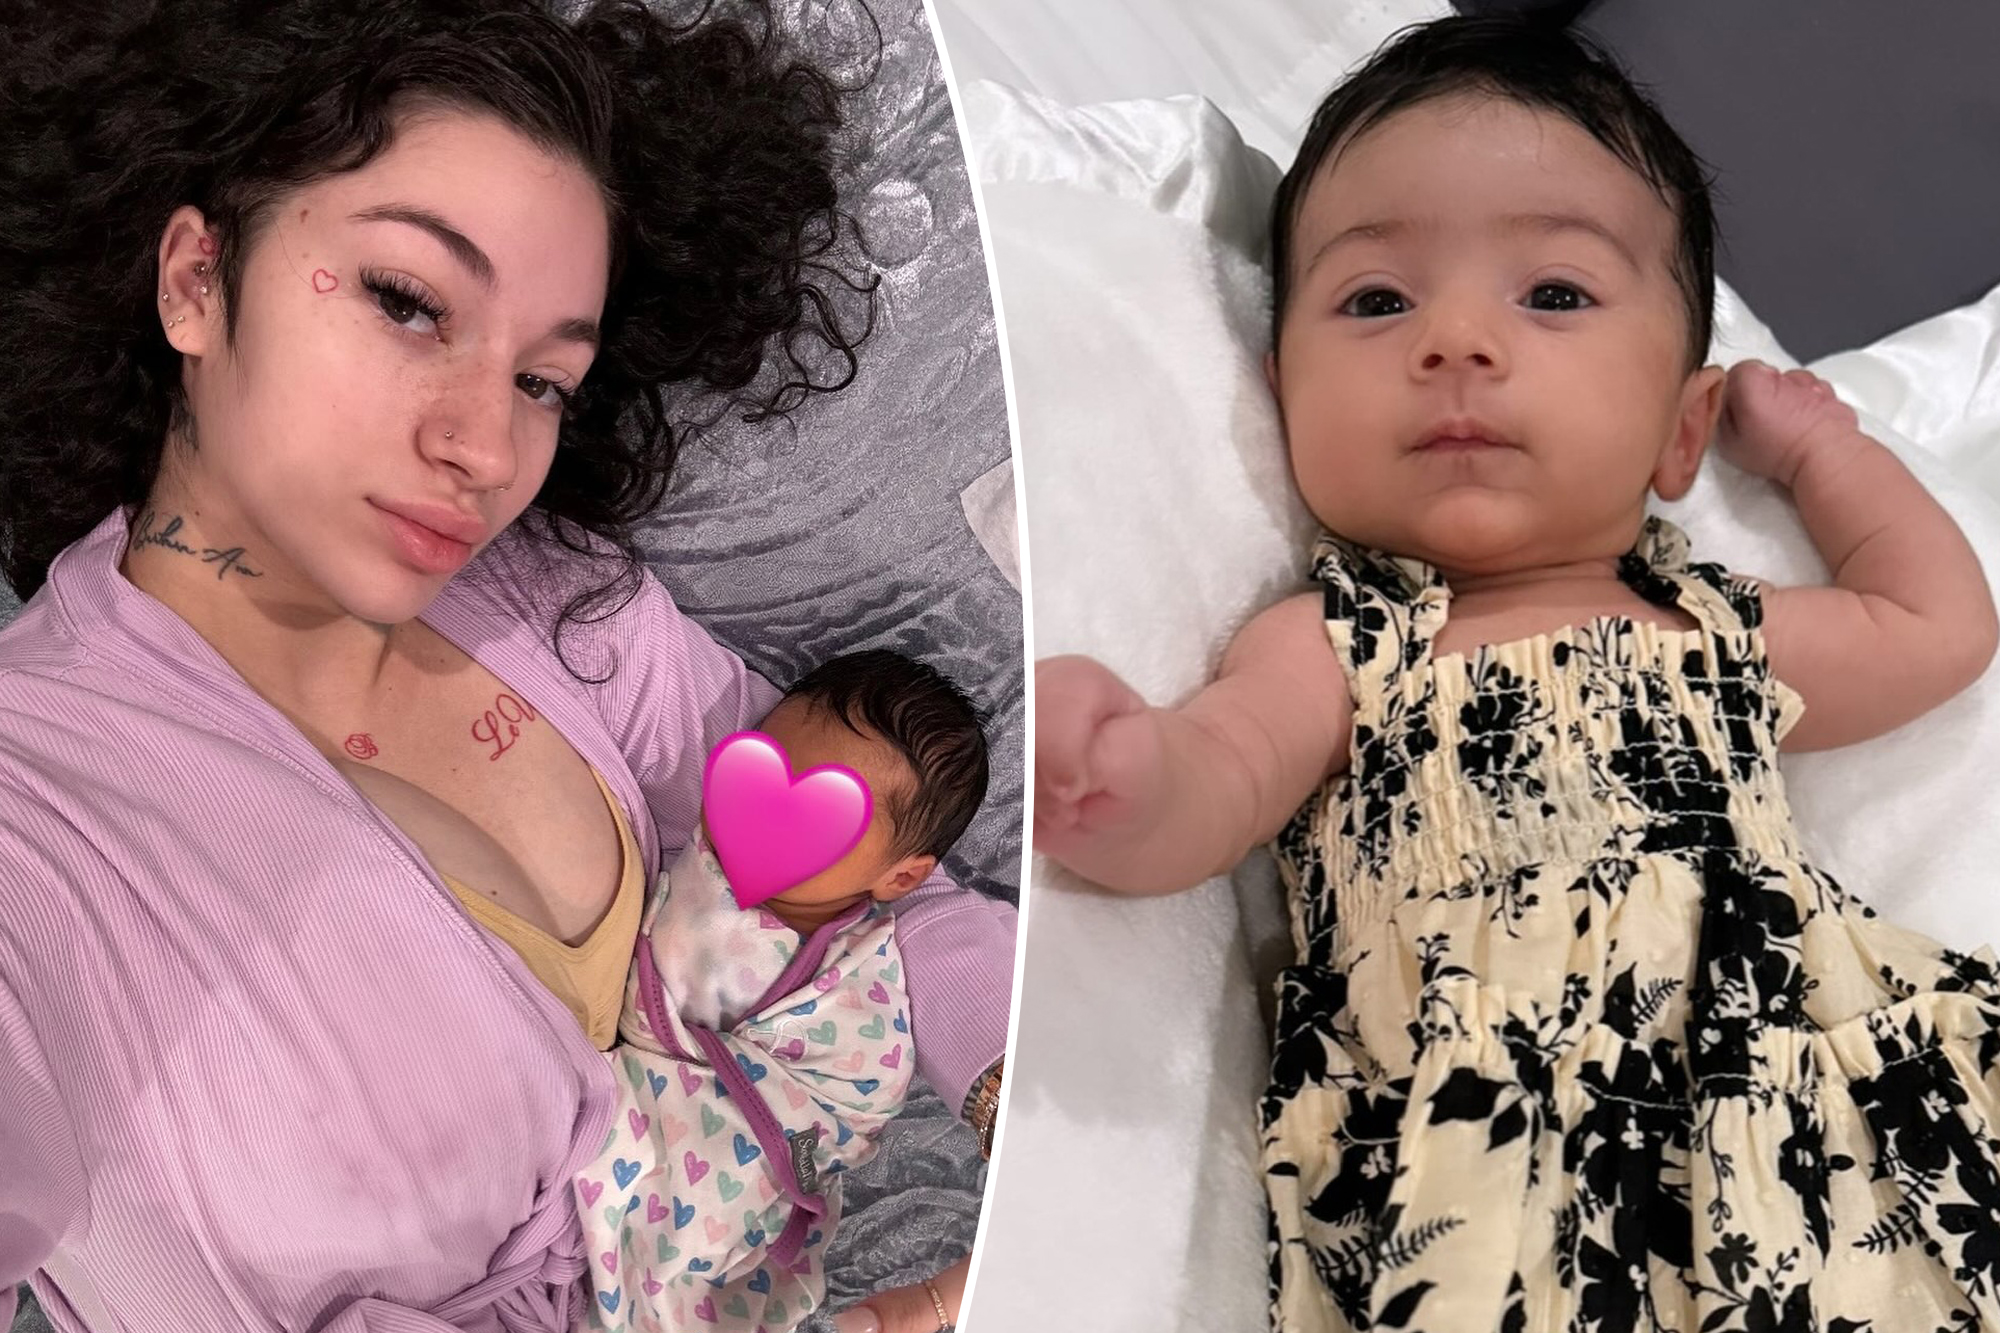 Bhad Bhabie Celebrates Mother's Day by Revealing Daughter Kali's Face